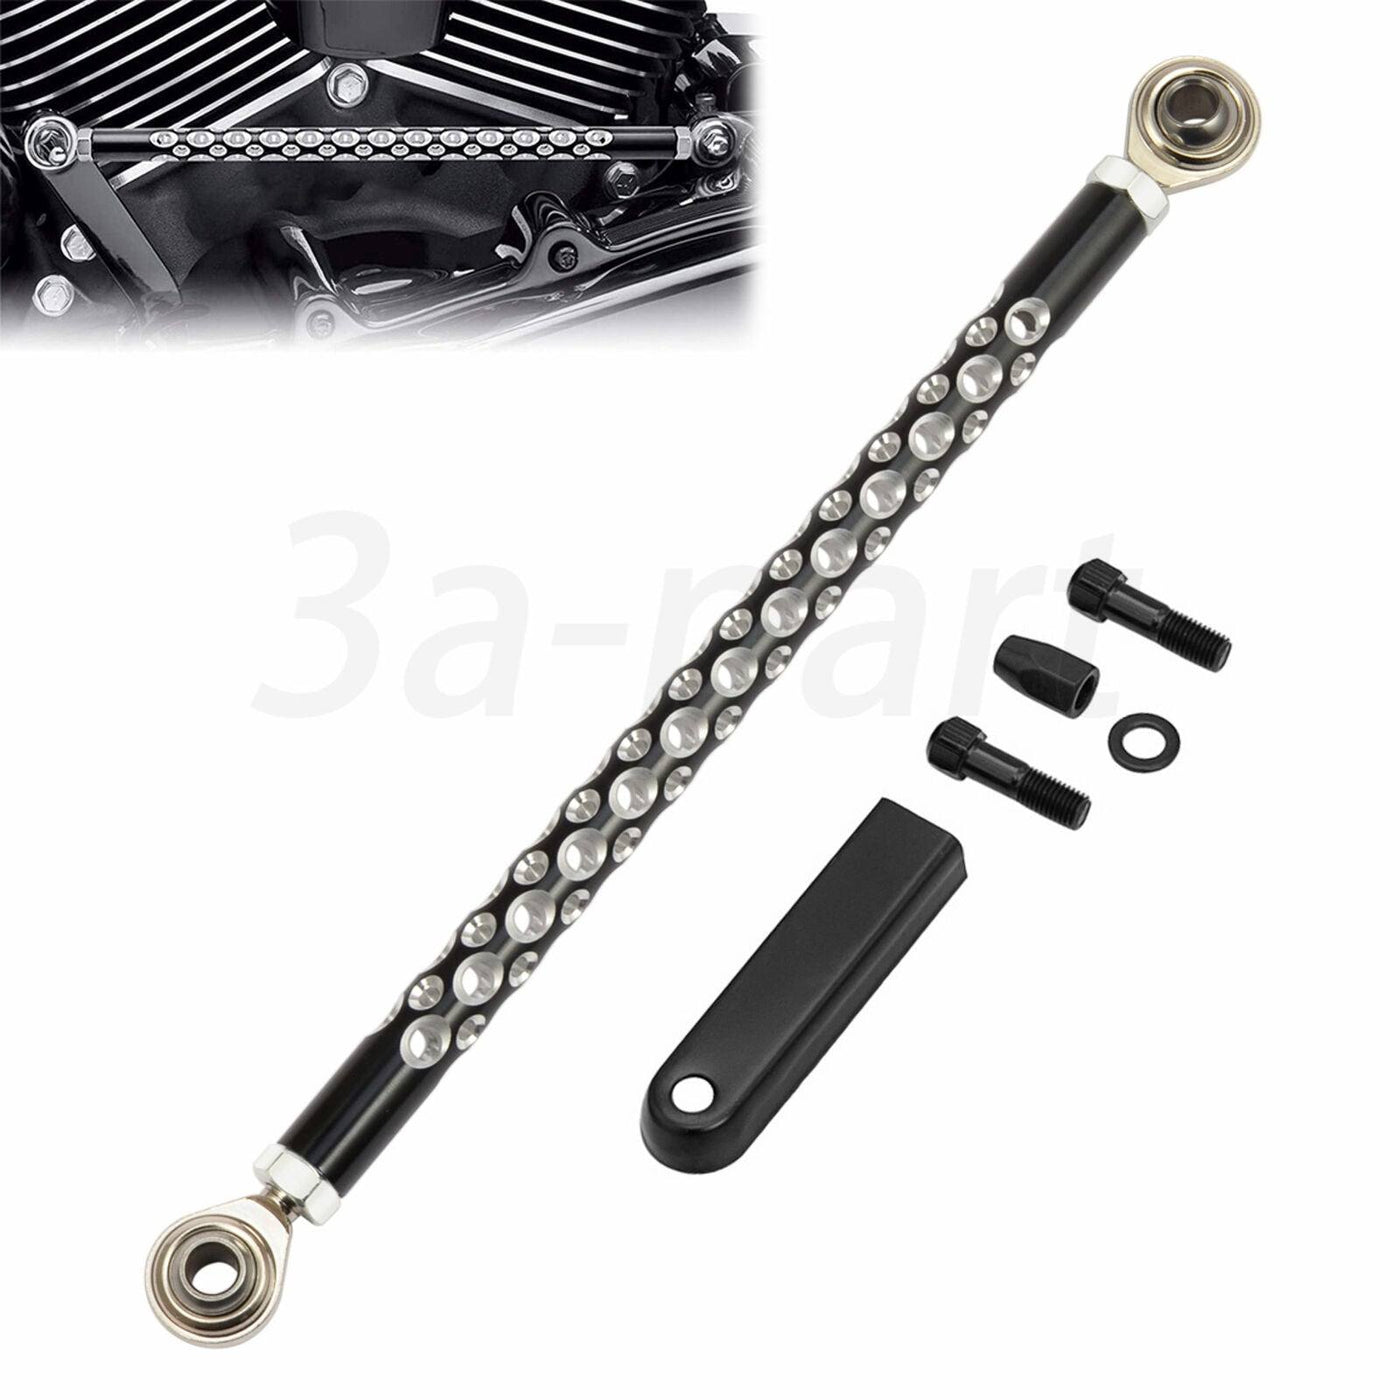 Shift Linkage Shifter Gear Black Chrome Fit for Harley Touring Softail 1986-2022 - Moto Life Products